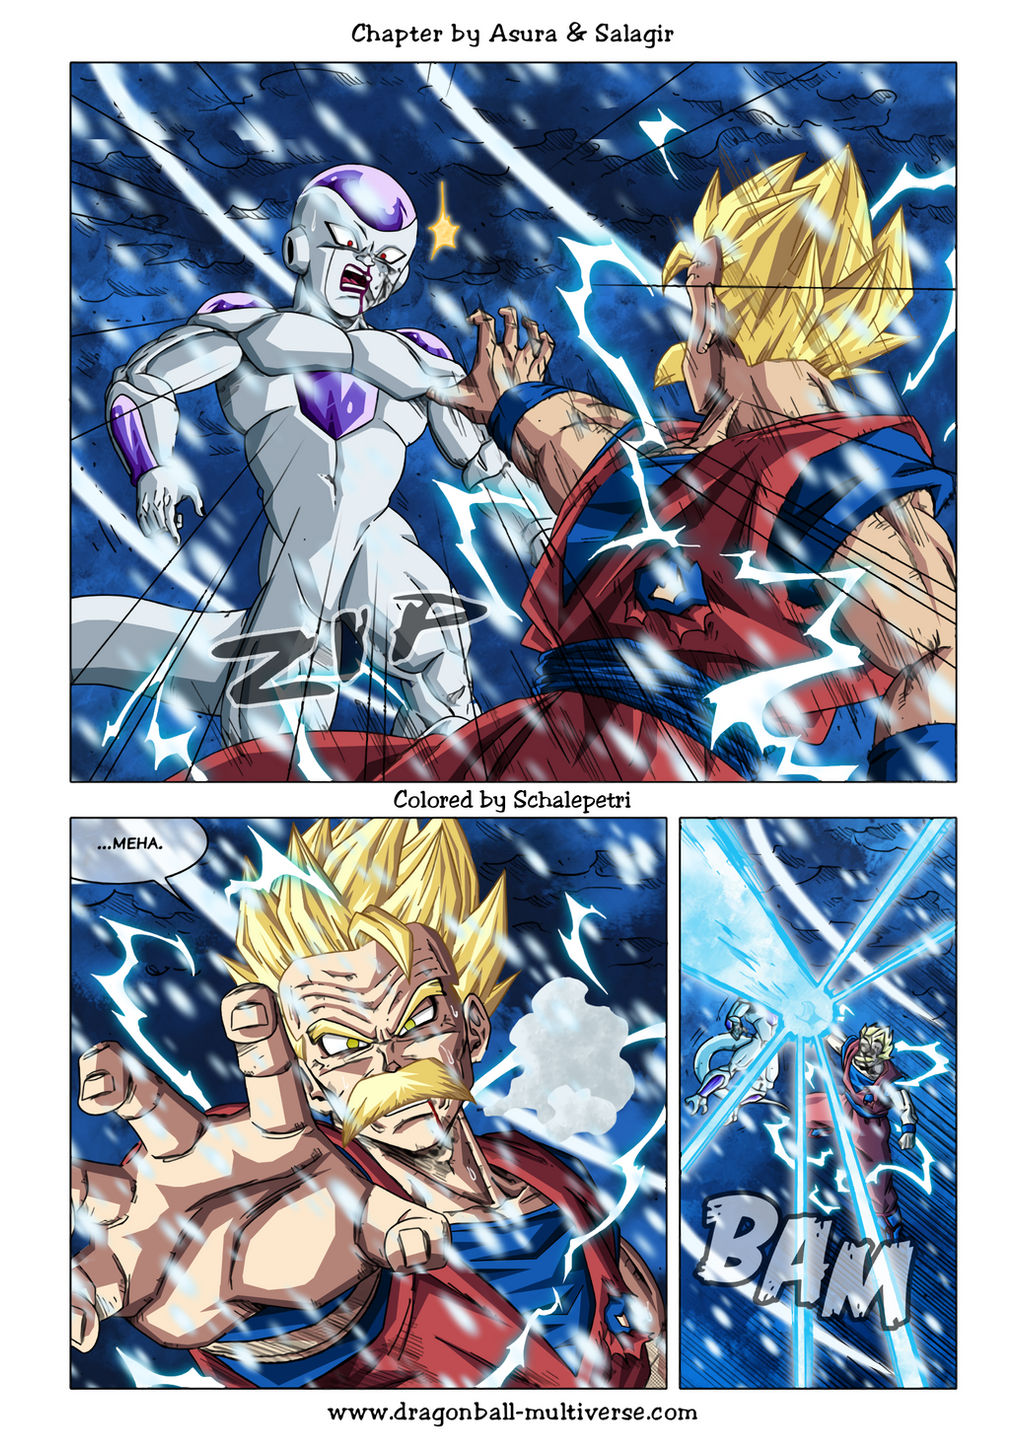 DBM page 1003 coloration by BK-81 on DeviantArt